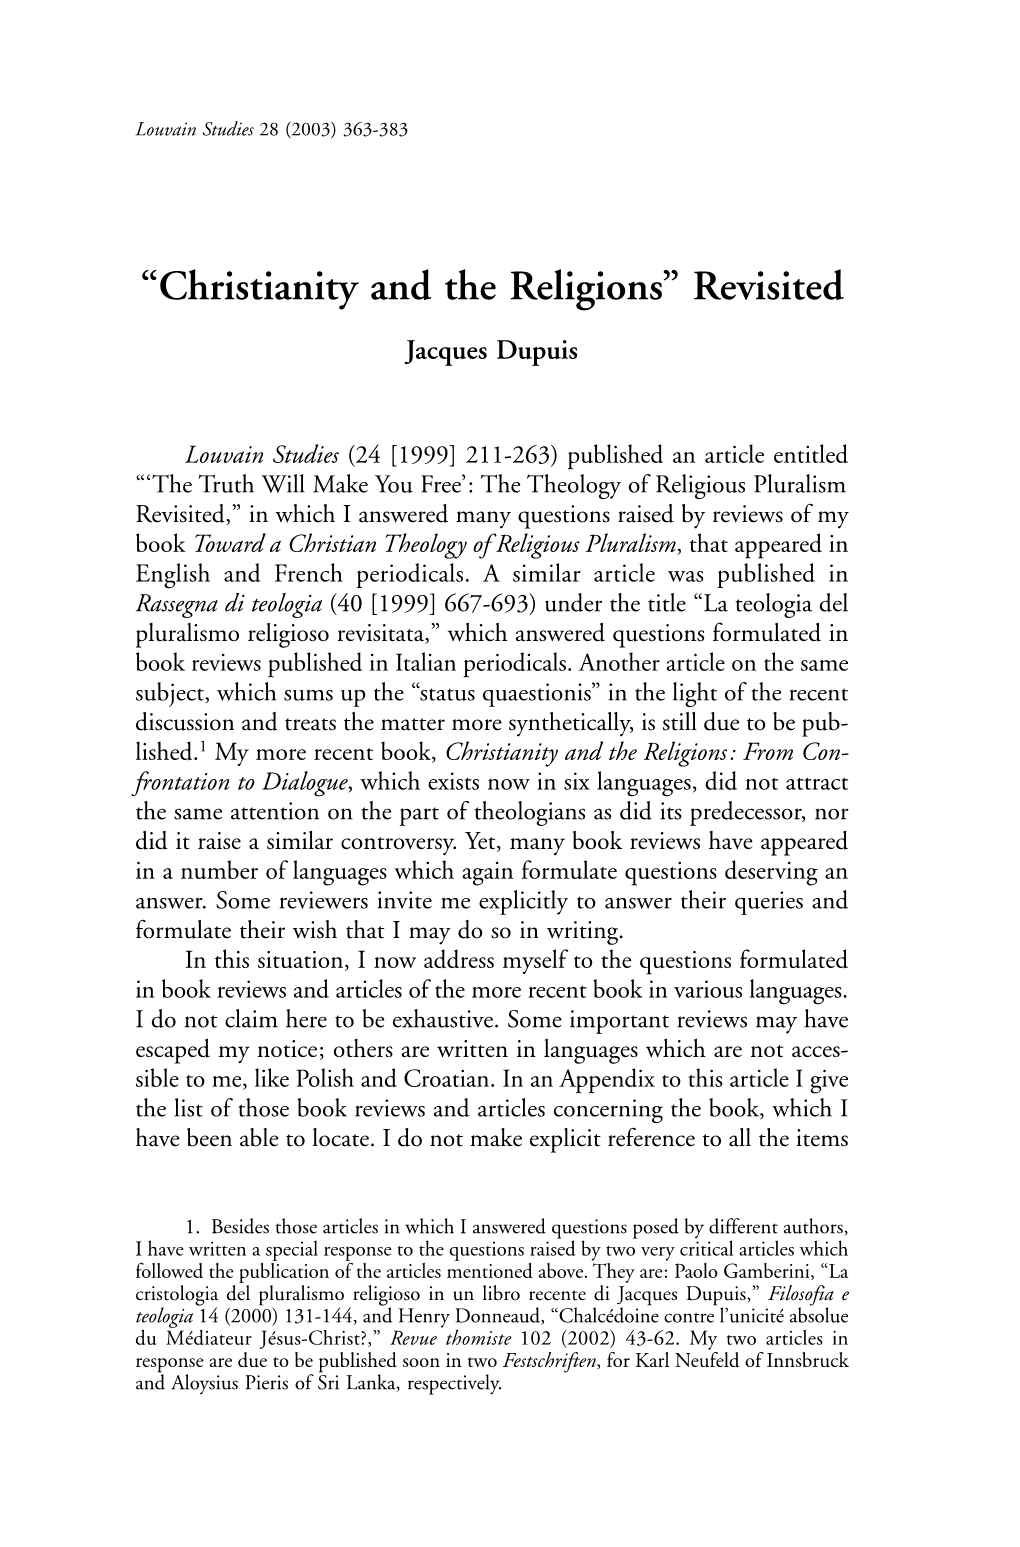 “Christianity and the Religions” Revisited Jacques Dupuis